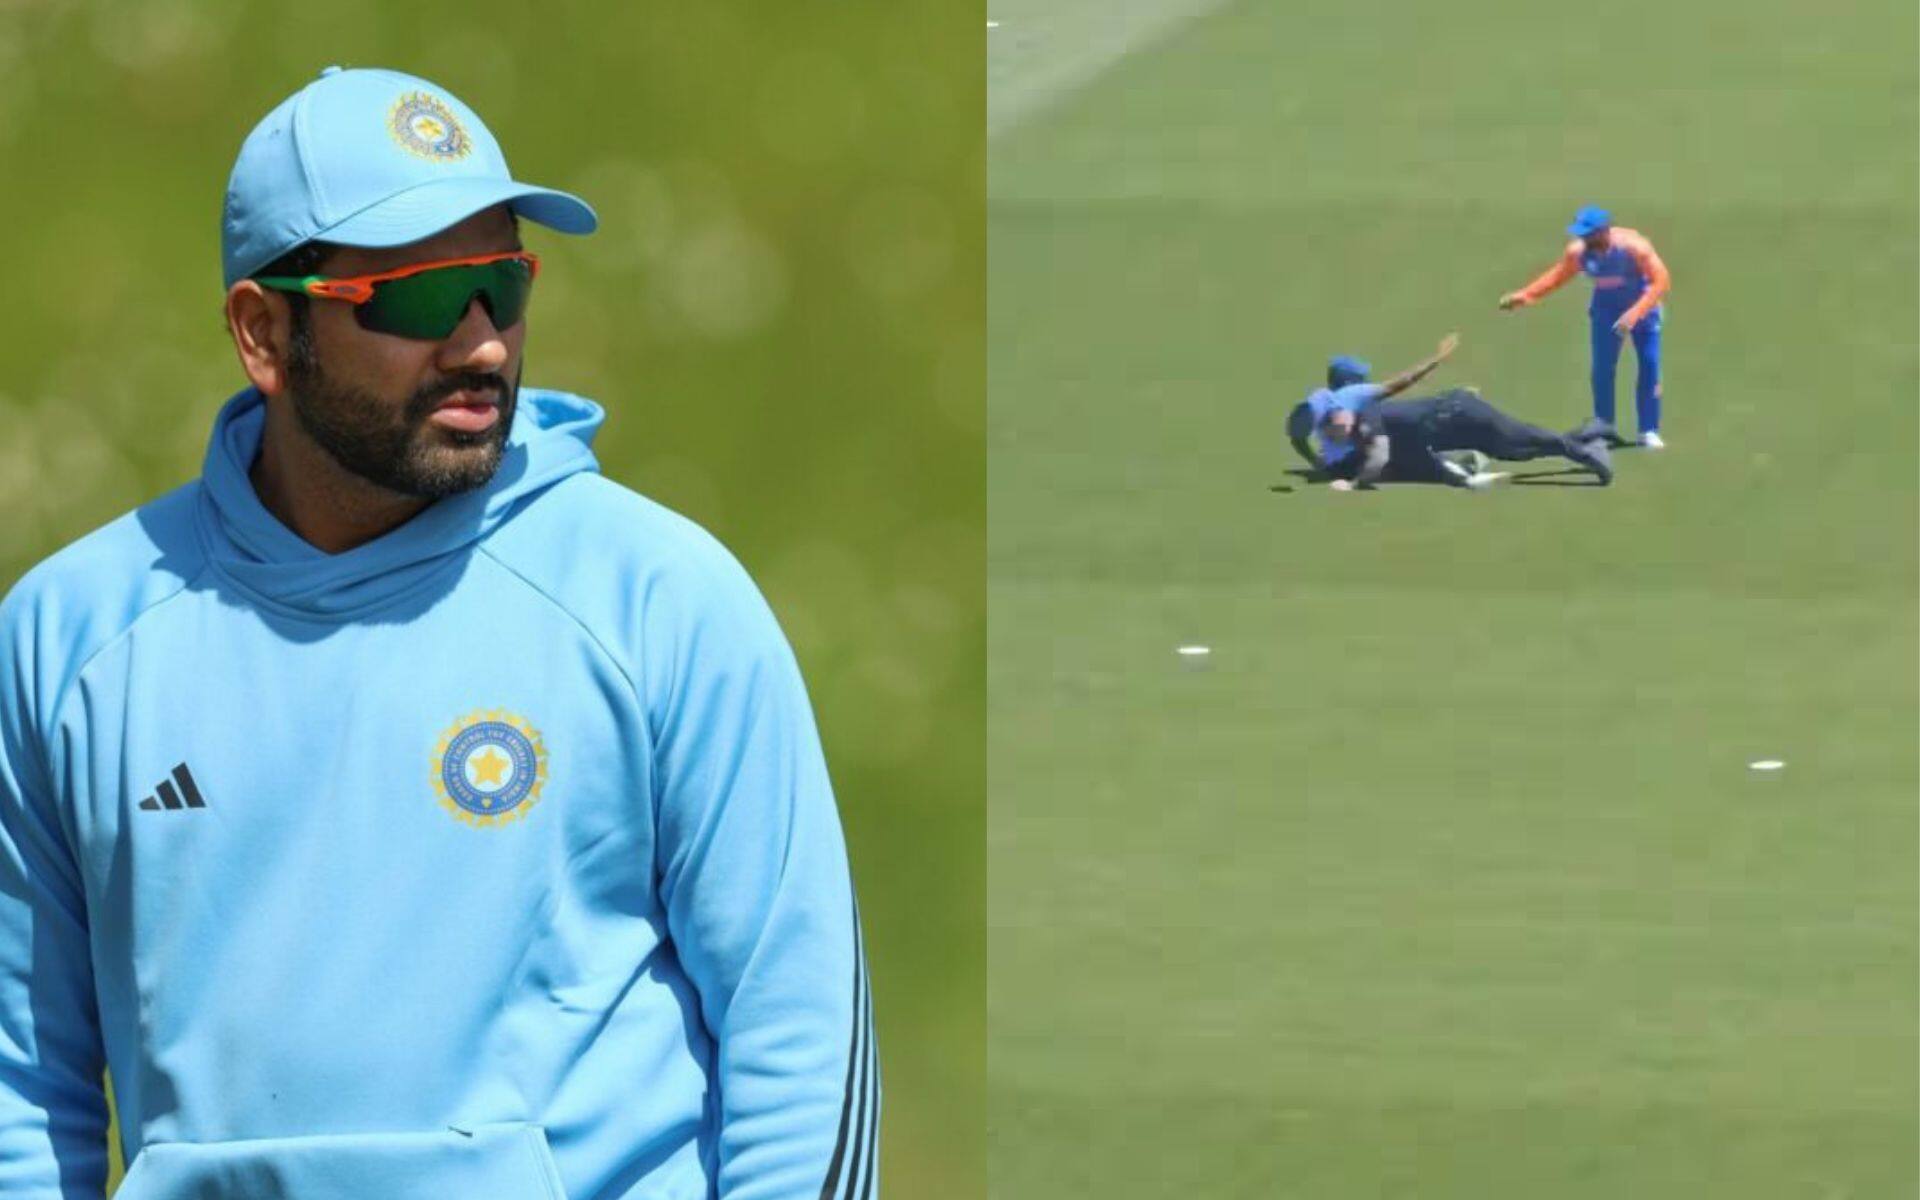 Rohit Sharma was troubled by pitch invader in the warm-up game (X.com)